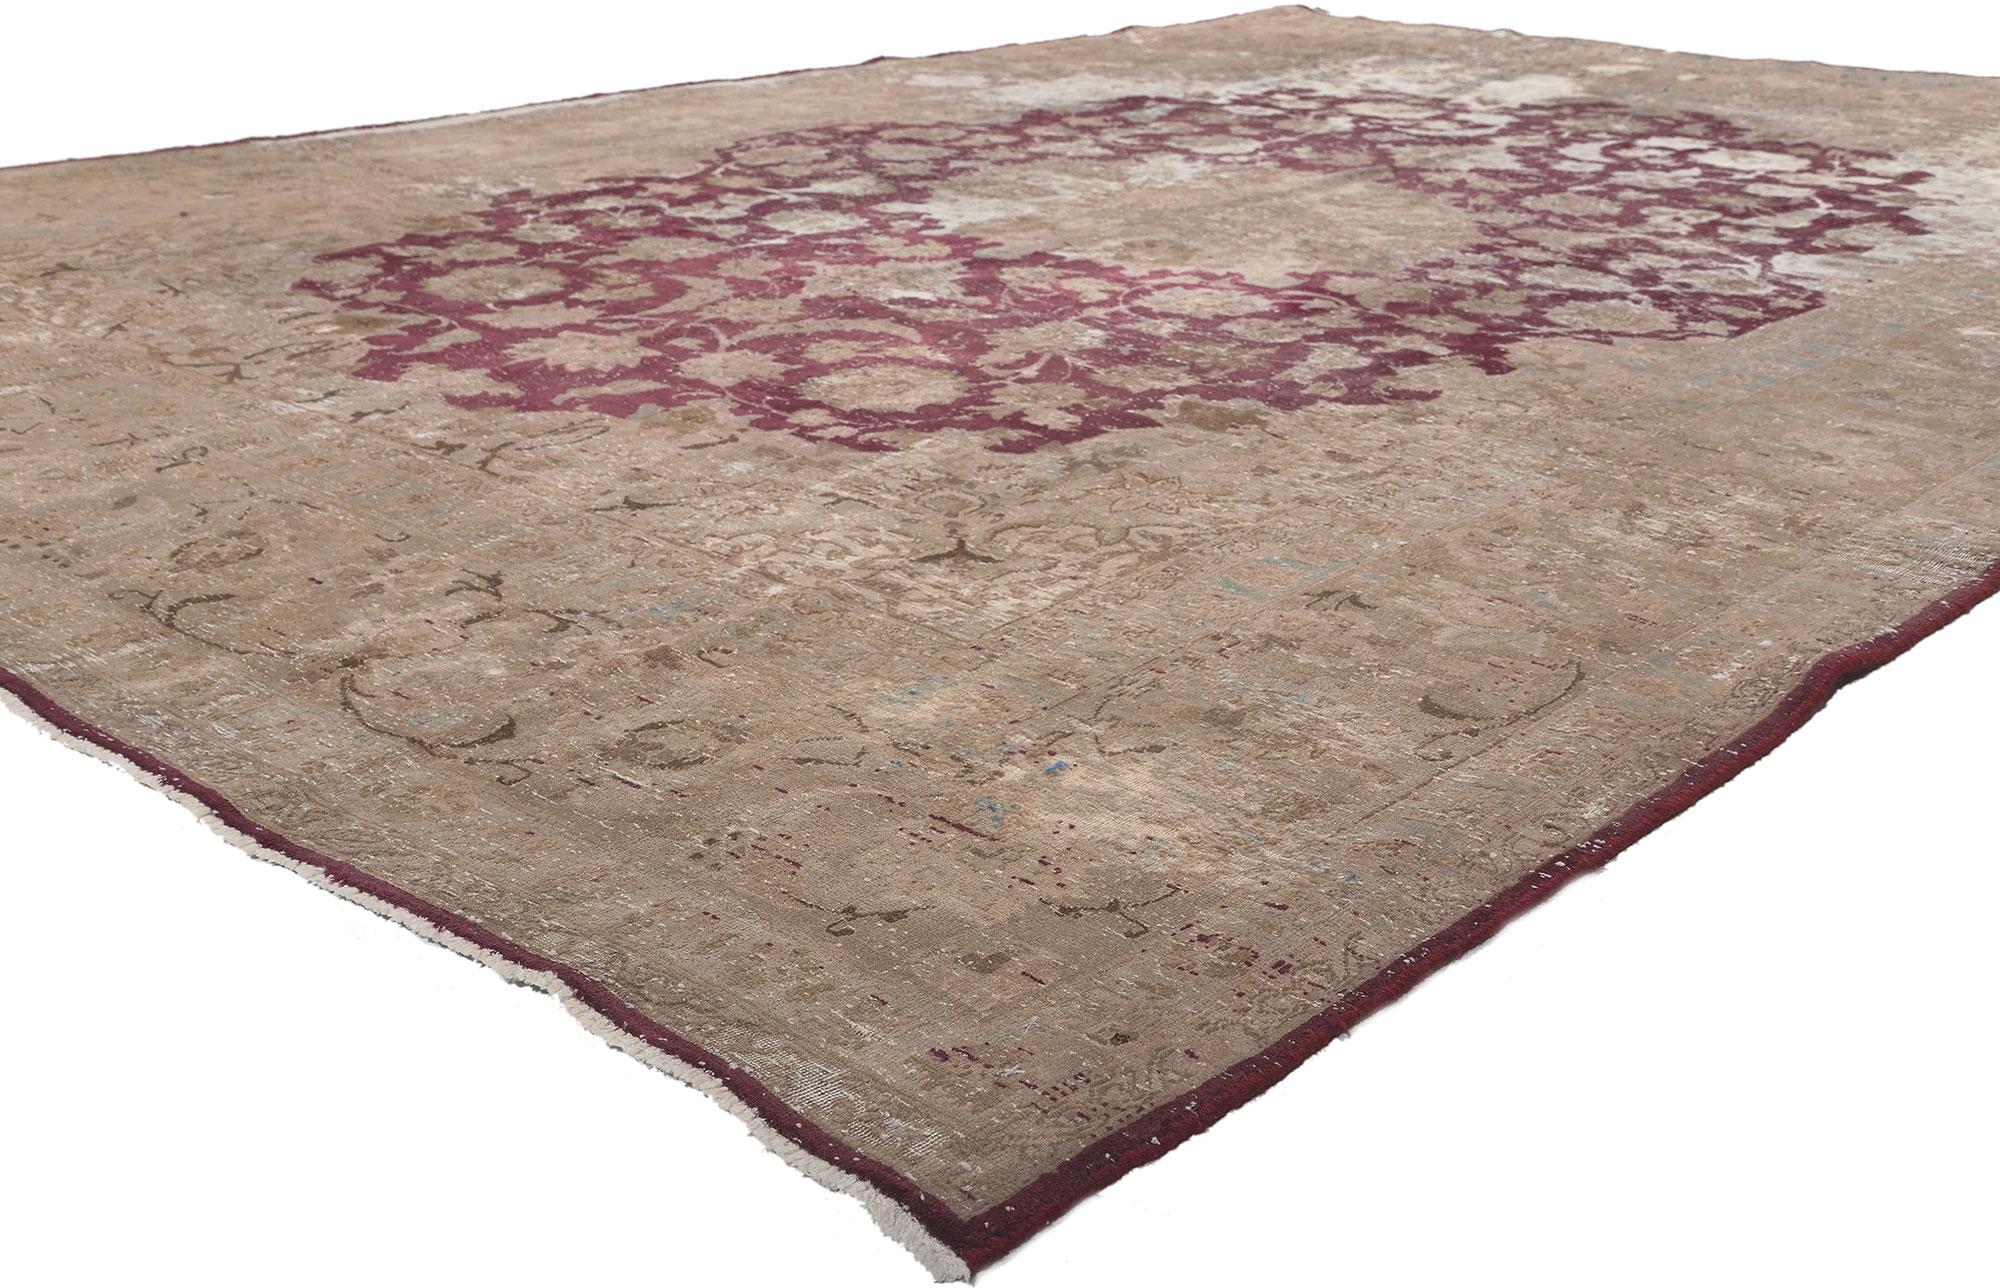 78594 Distressed Vintage Persian Kashan Rug, 08'01 x 11'09.
Rugged beauty meets weathered charm in this distressed vintage Persian Kashan rug. The faded botanical design and rustic earth-tone colors woven into this piece work together creating a